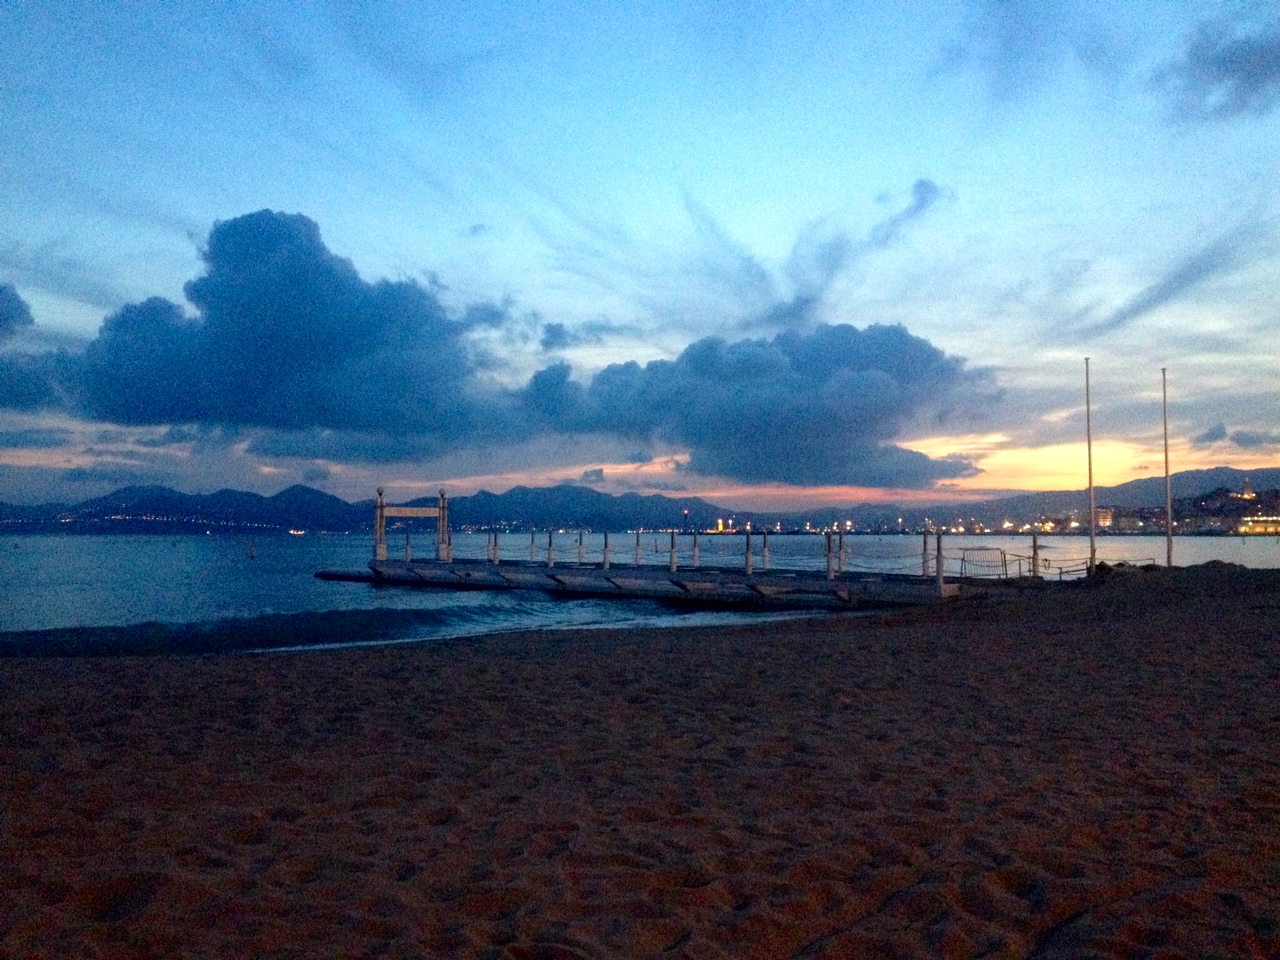 A winter sunset in Cannes